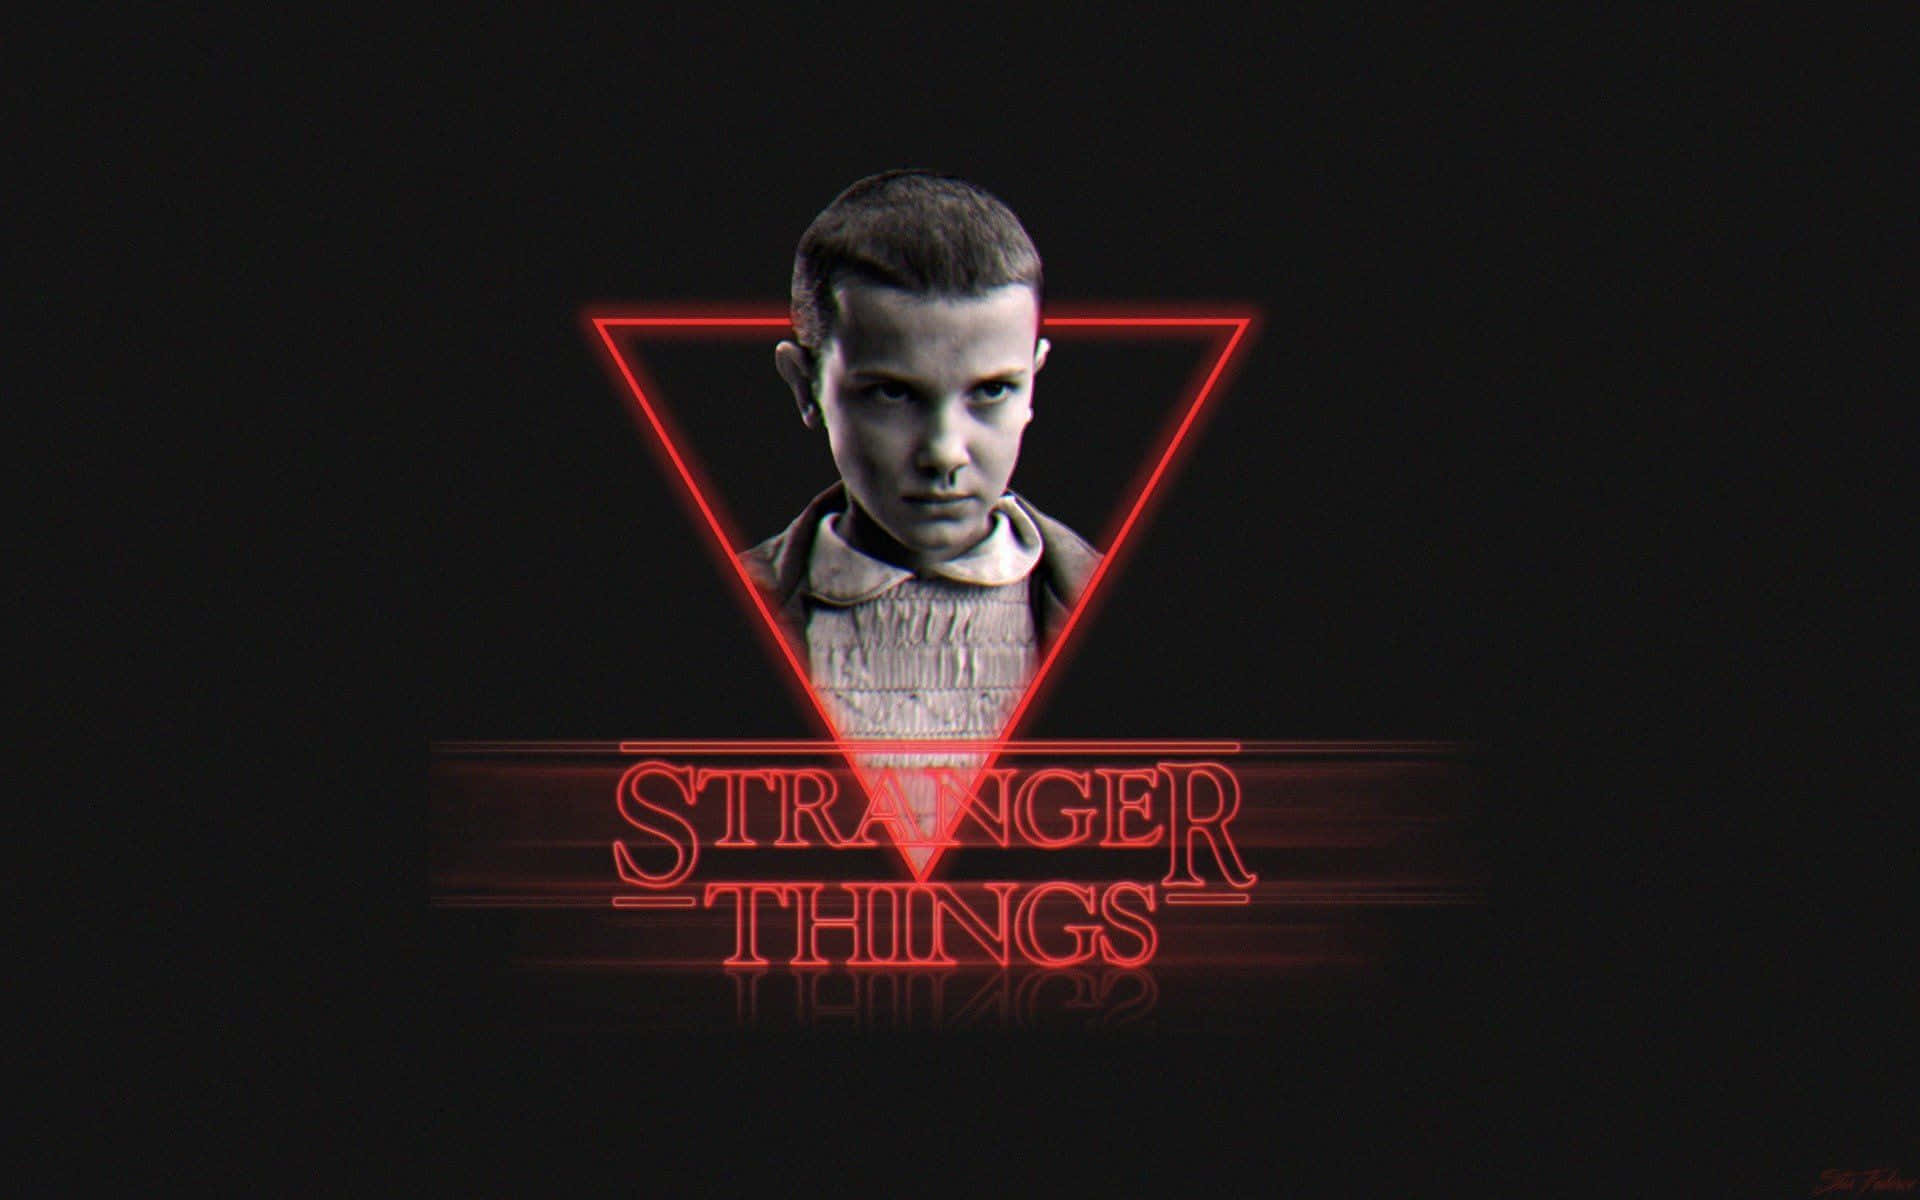 "Eleven, the most powerful and mysterious character from Stranger Things!" Wallpaper